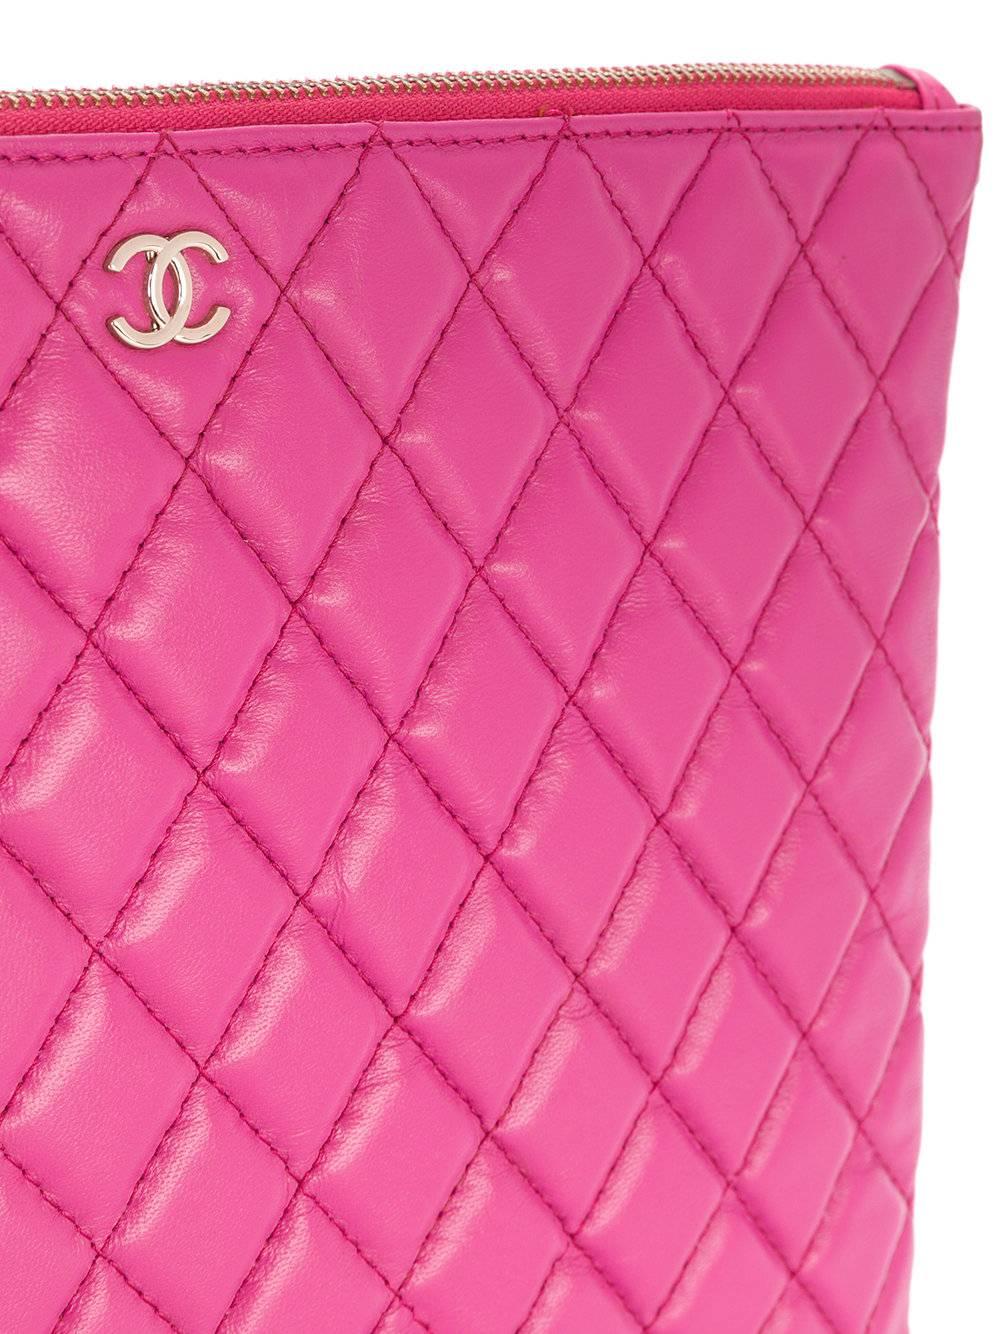 Pink Chanel Large Quilted Clutch Bag